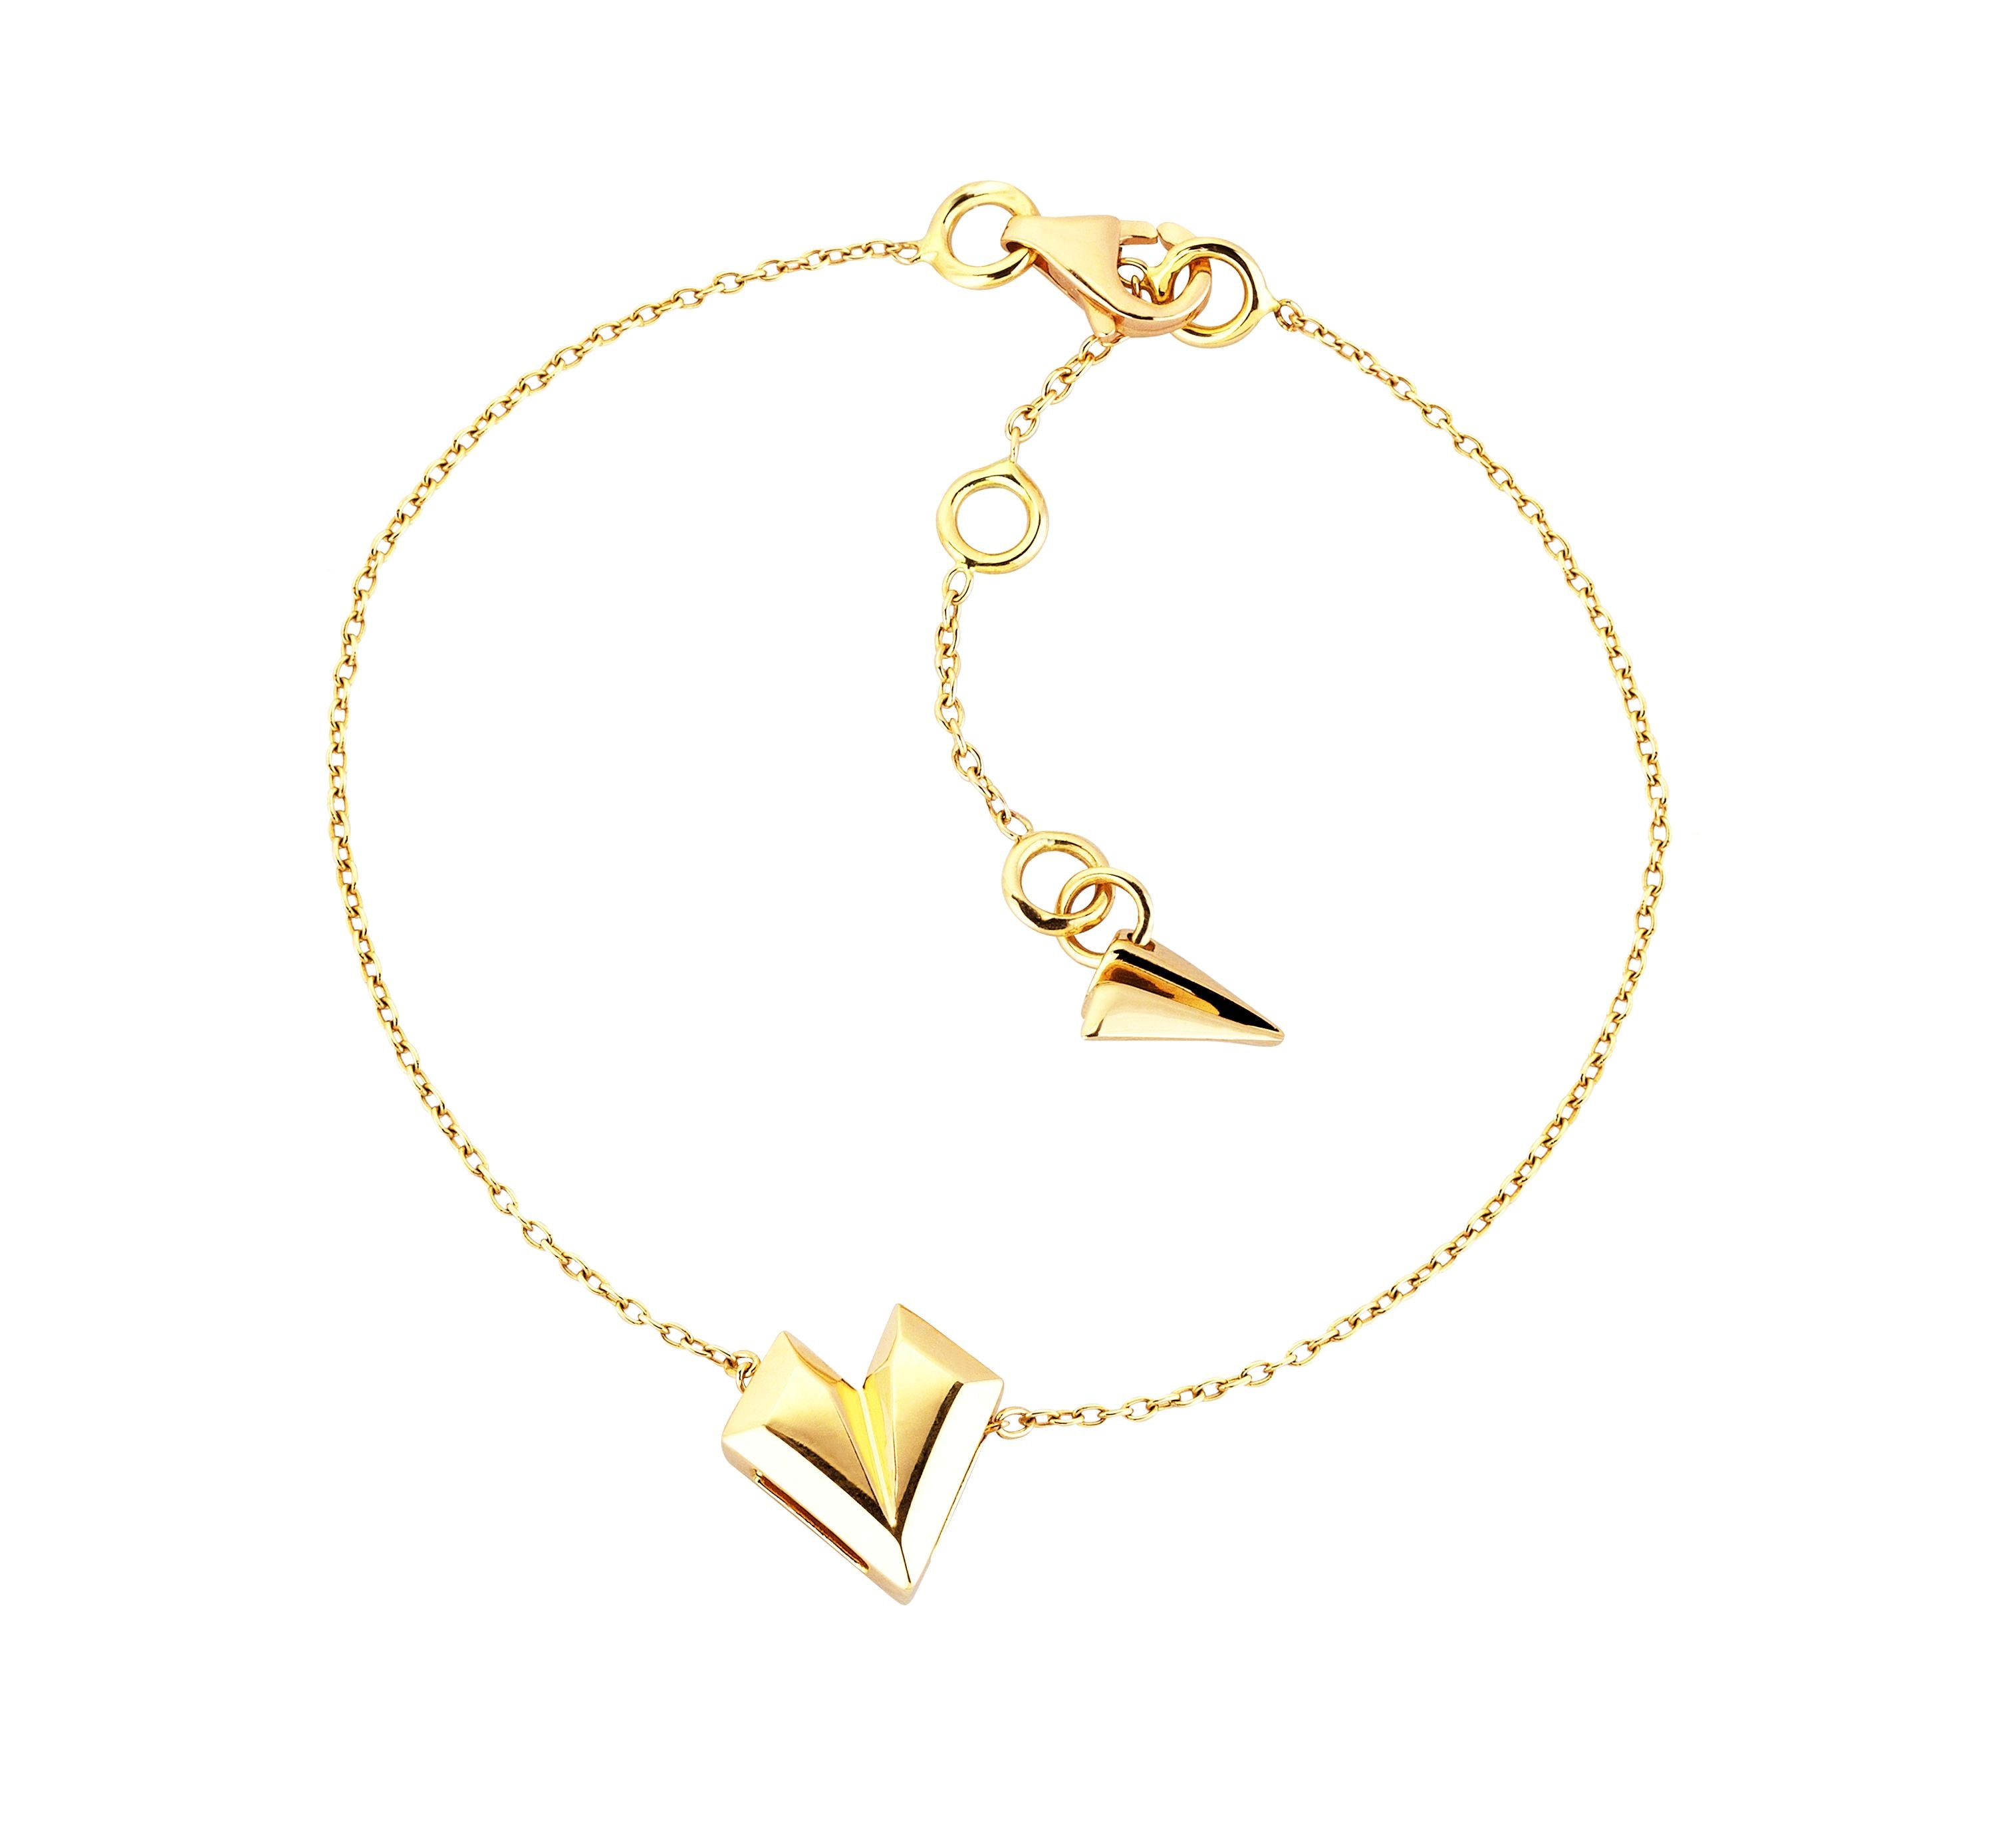 Origami Love Bracelet in Yellow Gold - Her Story Shop